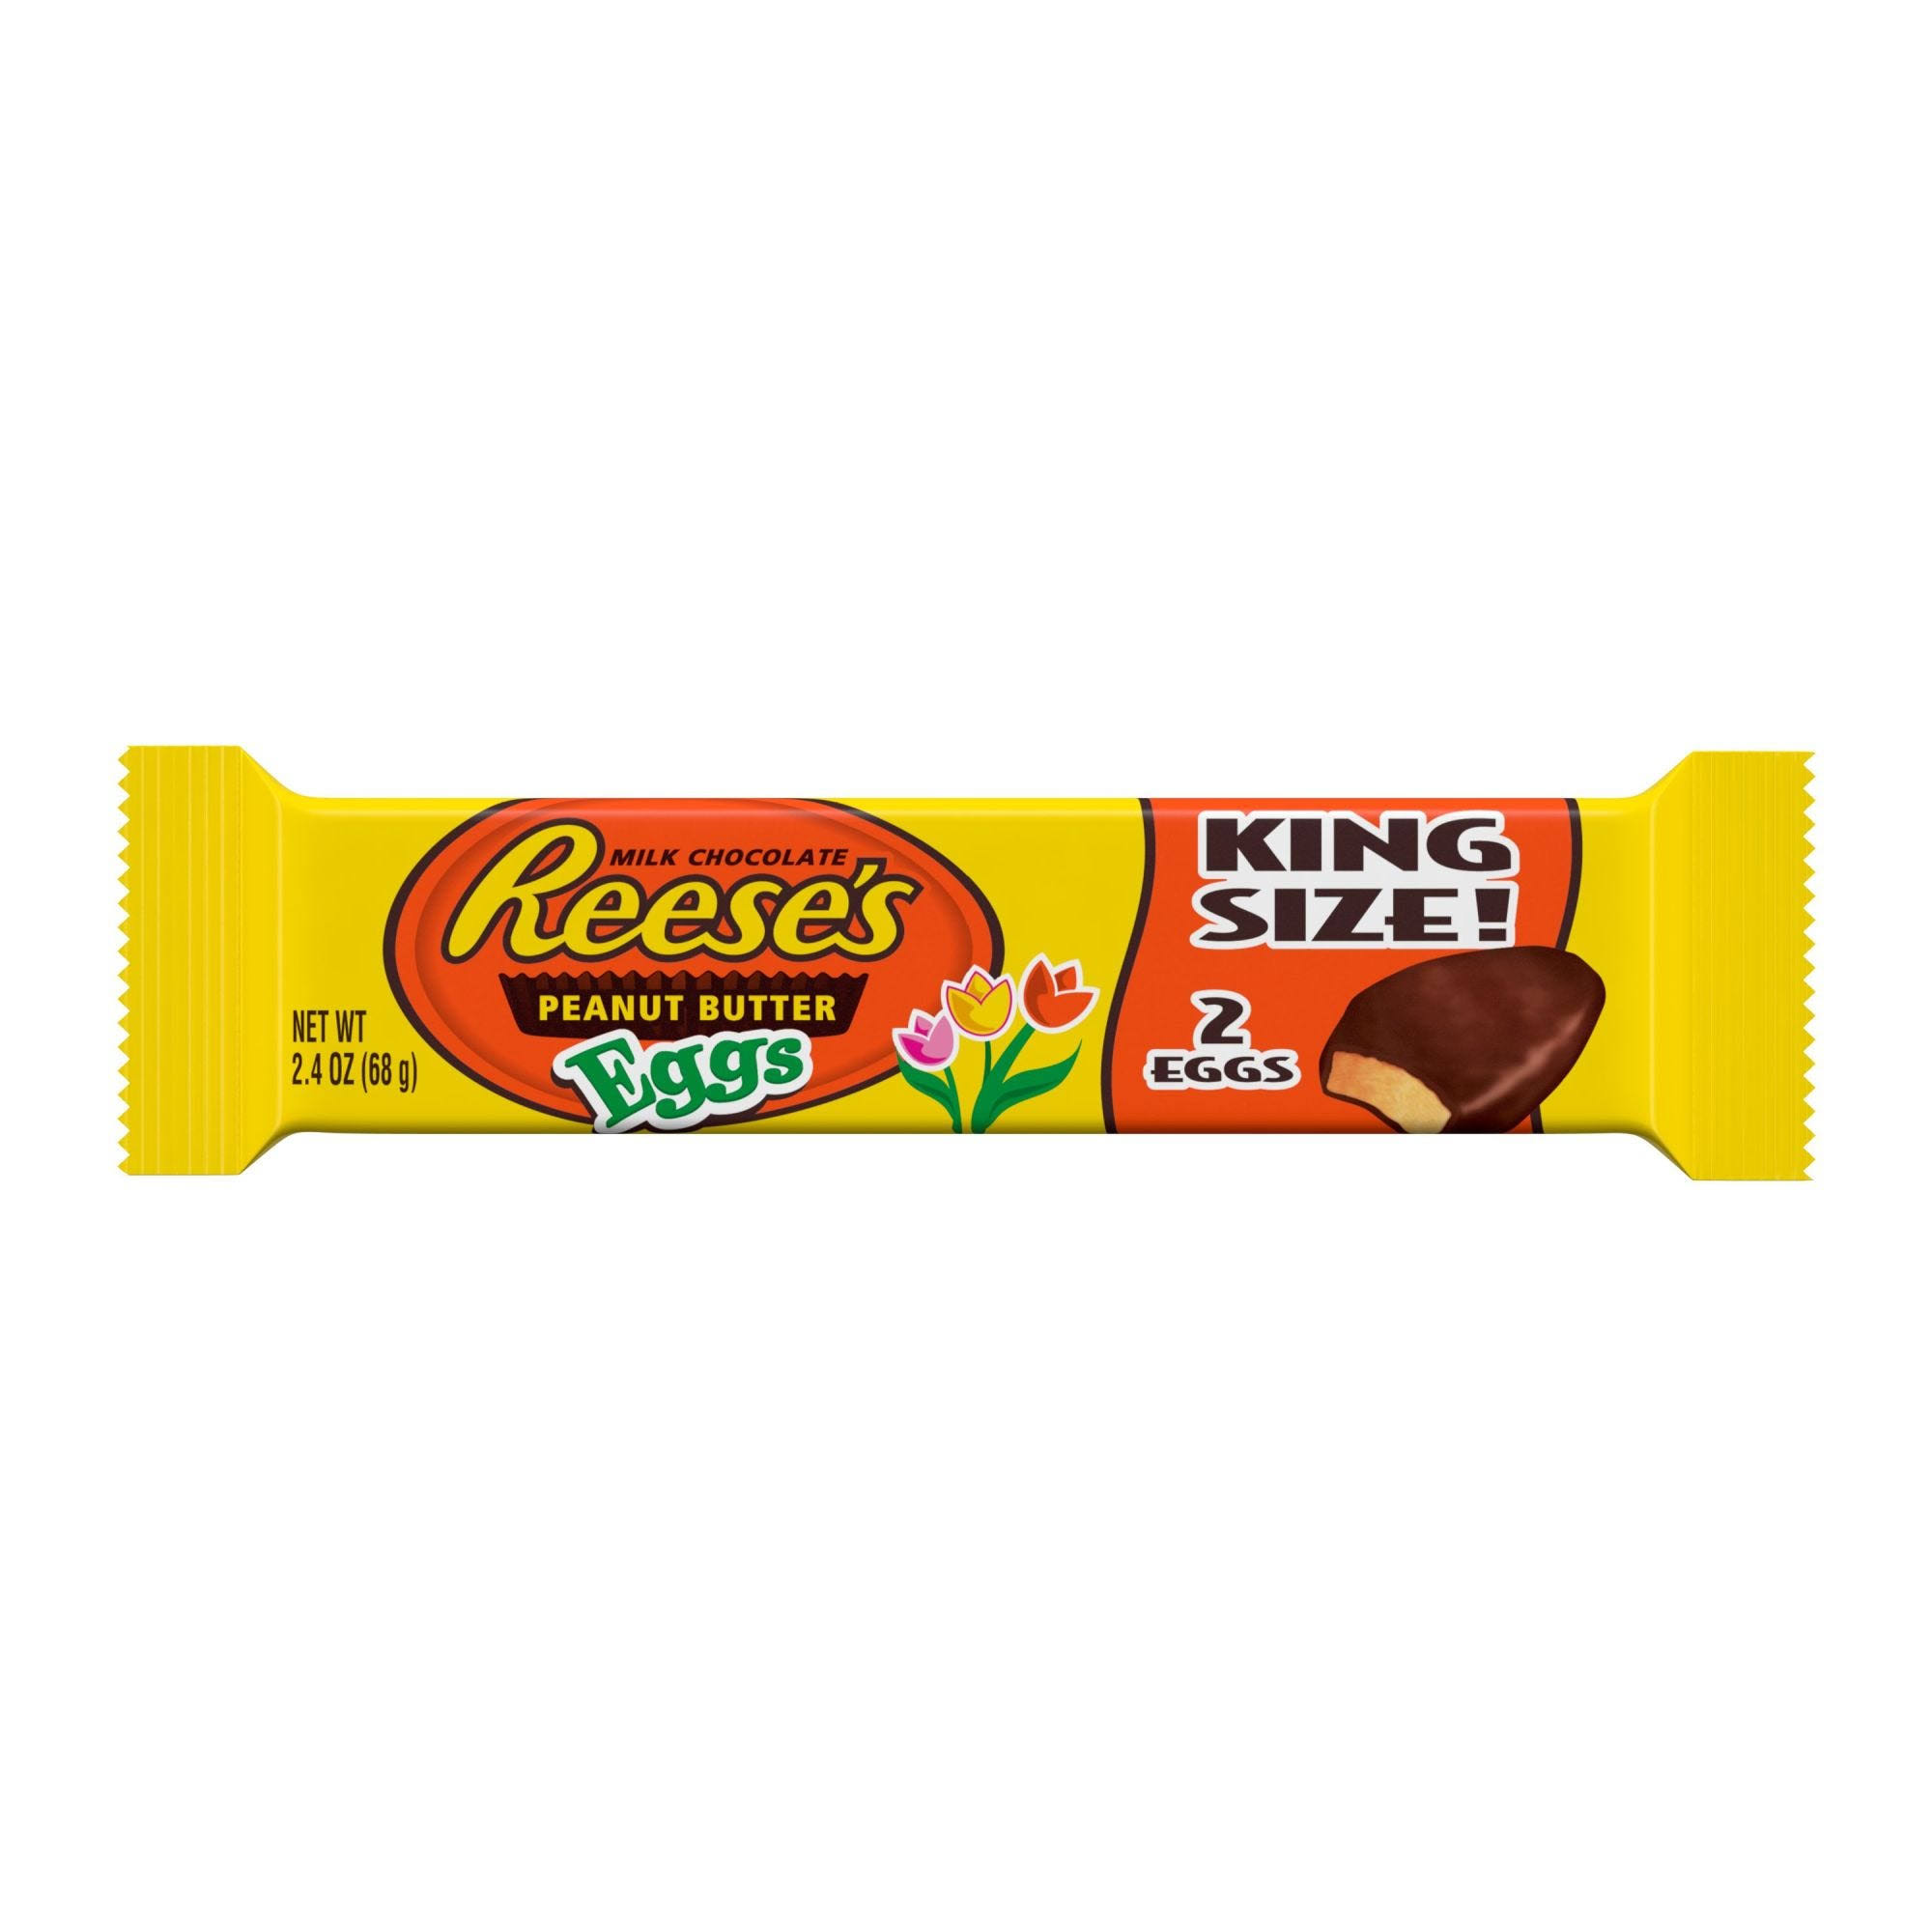 Reese's Eggs Chocolate - Peanut Butter, King Size, 68g, 2pk